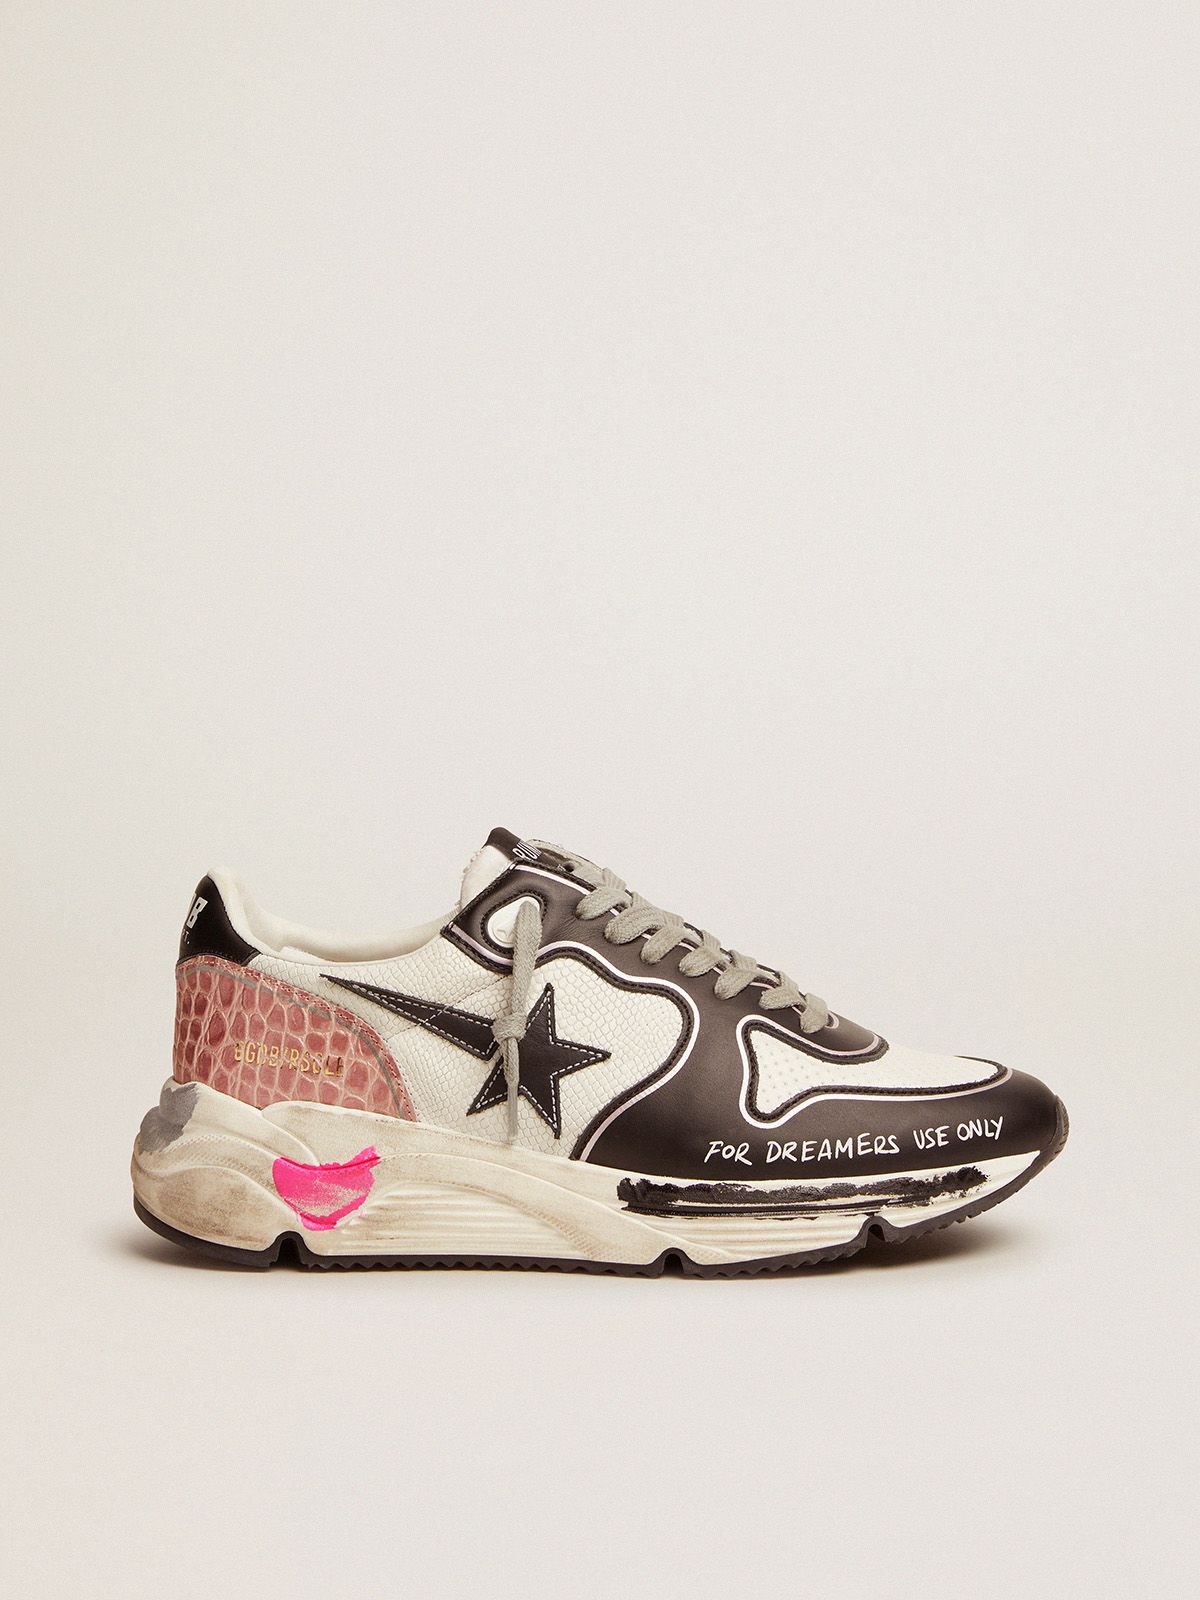 golden goose Sole snake-print Running details contrasting sneakers leather white black in with